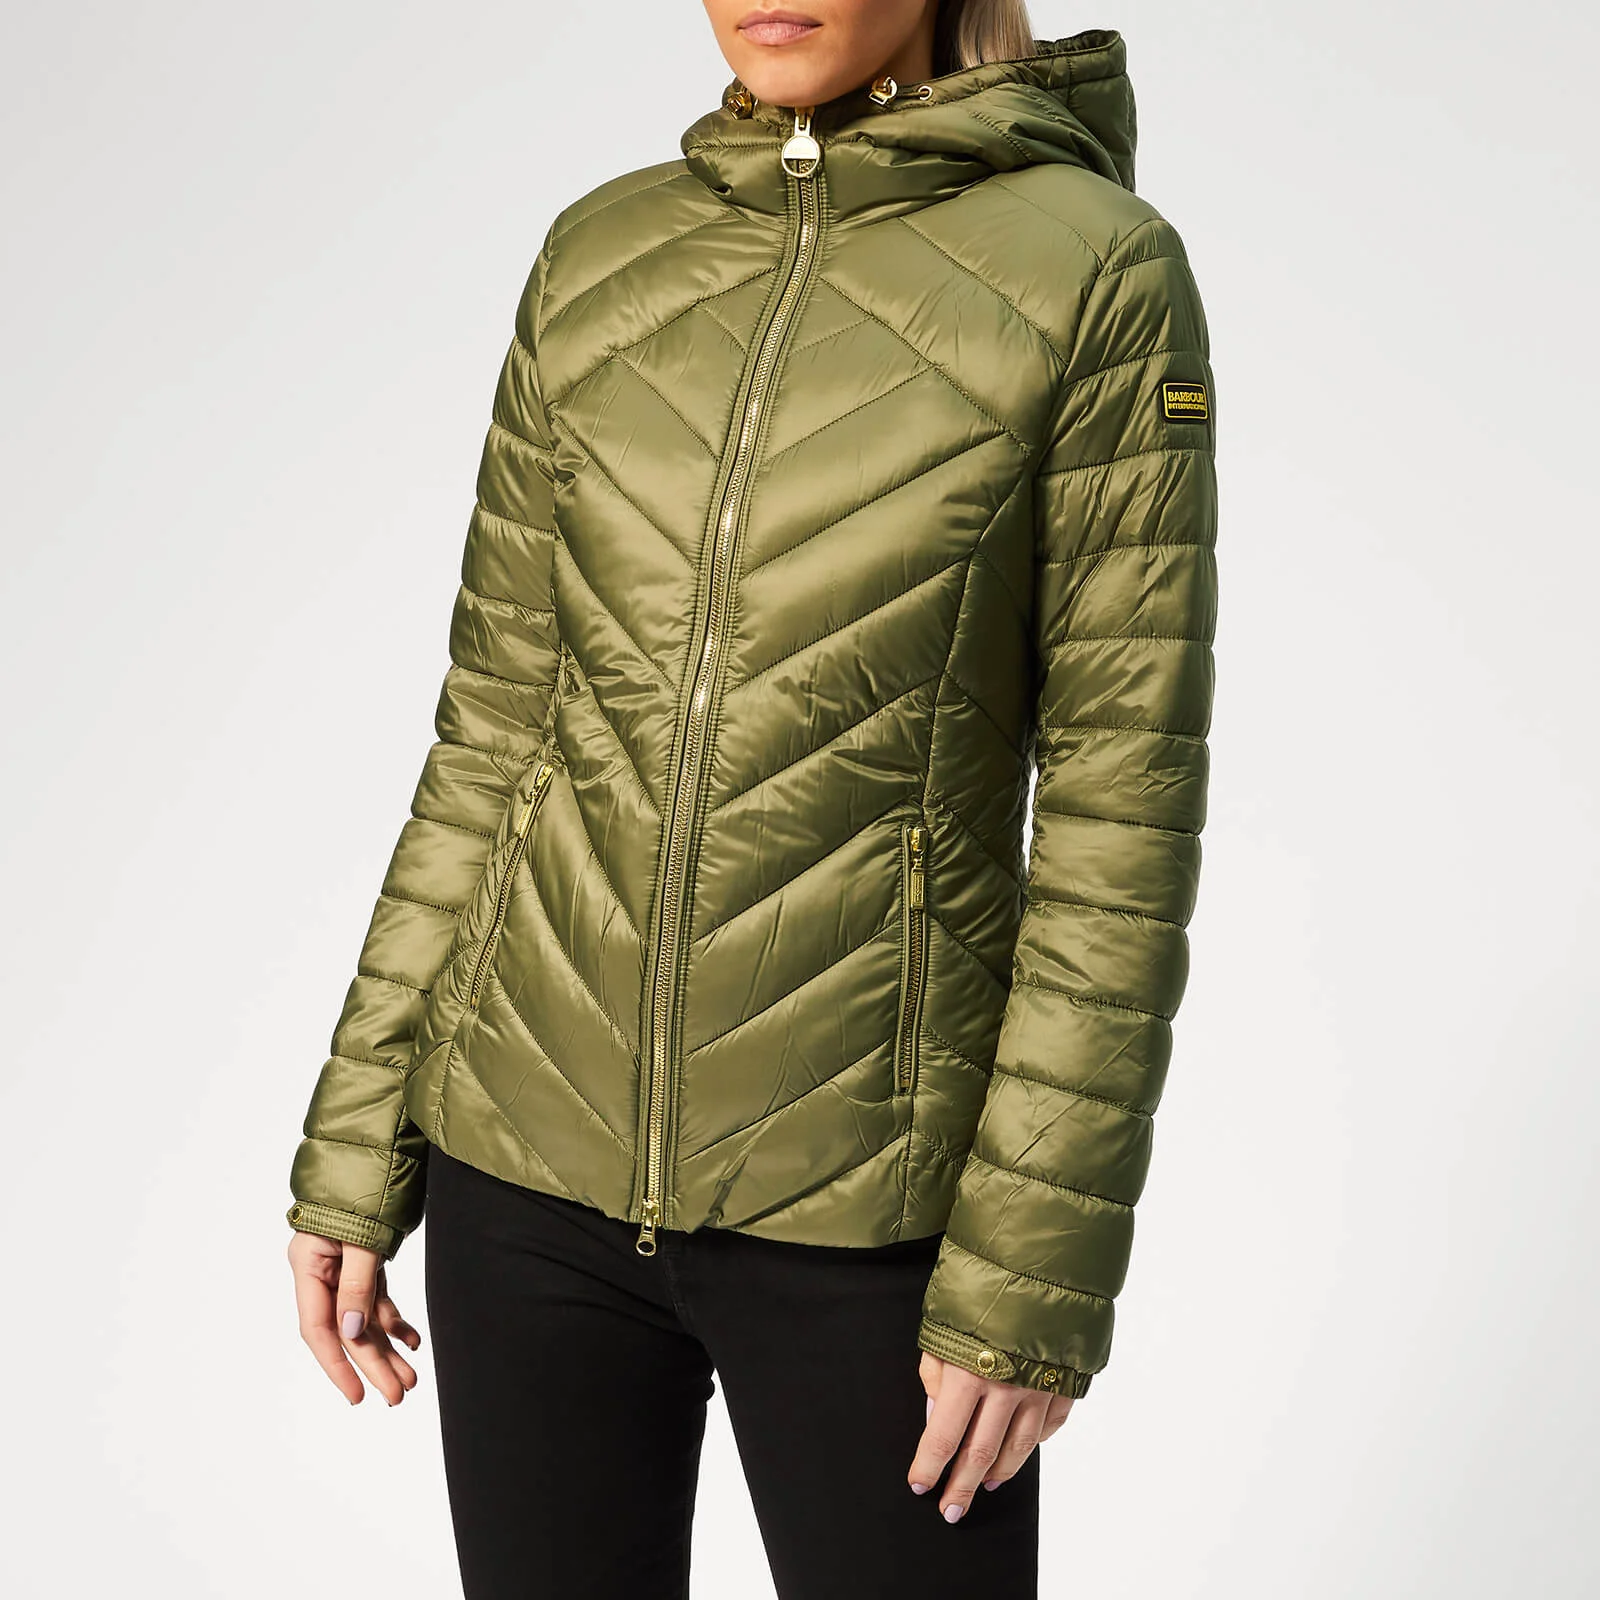 Barbour International Women's Durant Quilt Jacket - Light Army Green Image 1